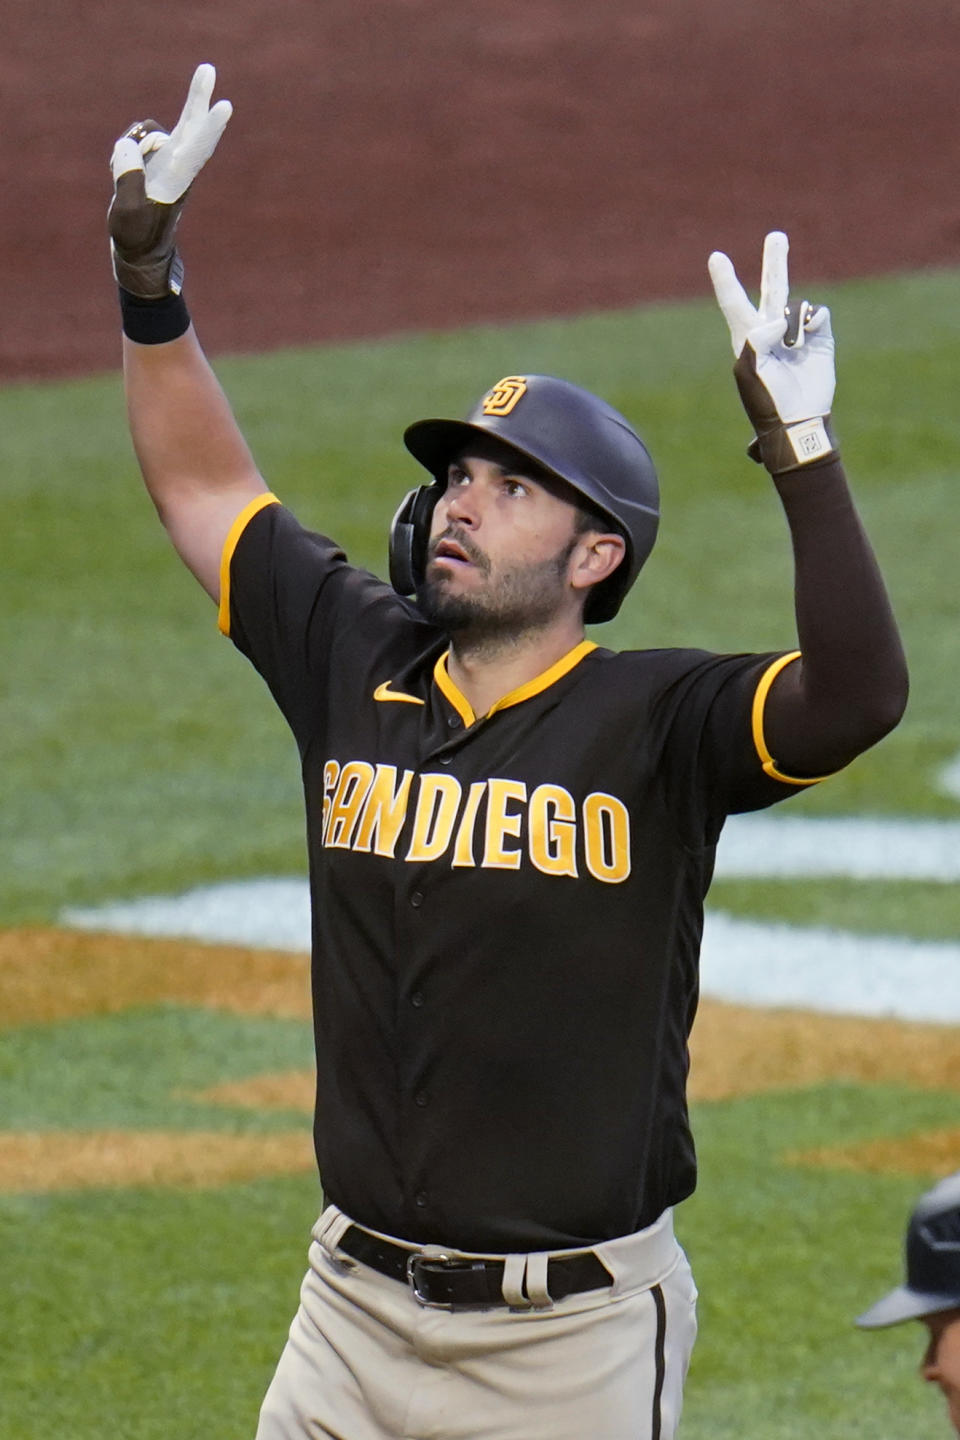 San Diego Padres' Eric Hosmer celebrates as he crosses home plate after hitting a three-run home run off Pittsburgh Pirates starting pitcher JT Brubaker during the fourth inning of a baseball game in Pittsburgh, Saturday, April 30, 2022. (AP Photo/Gene J. Puskar)